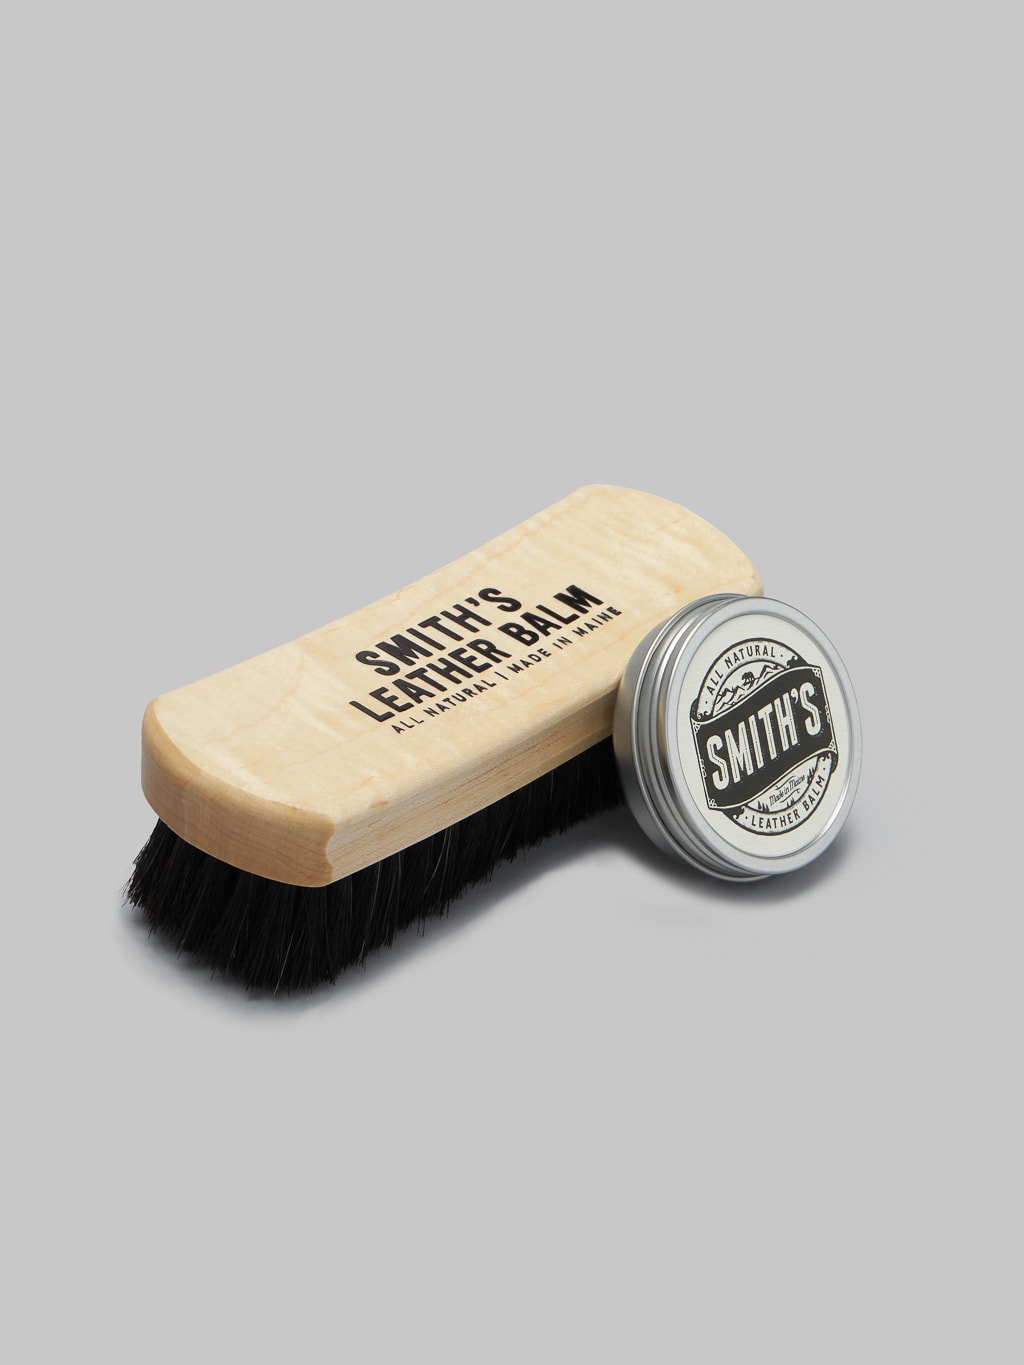 Smith s Horse Hair Brust and Leather balm 